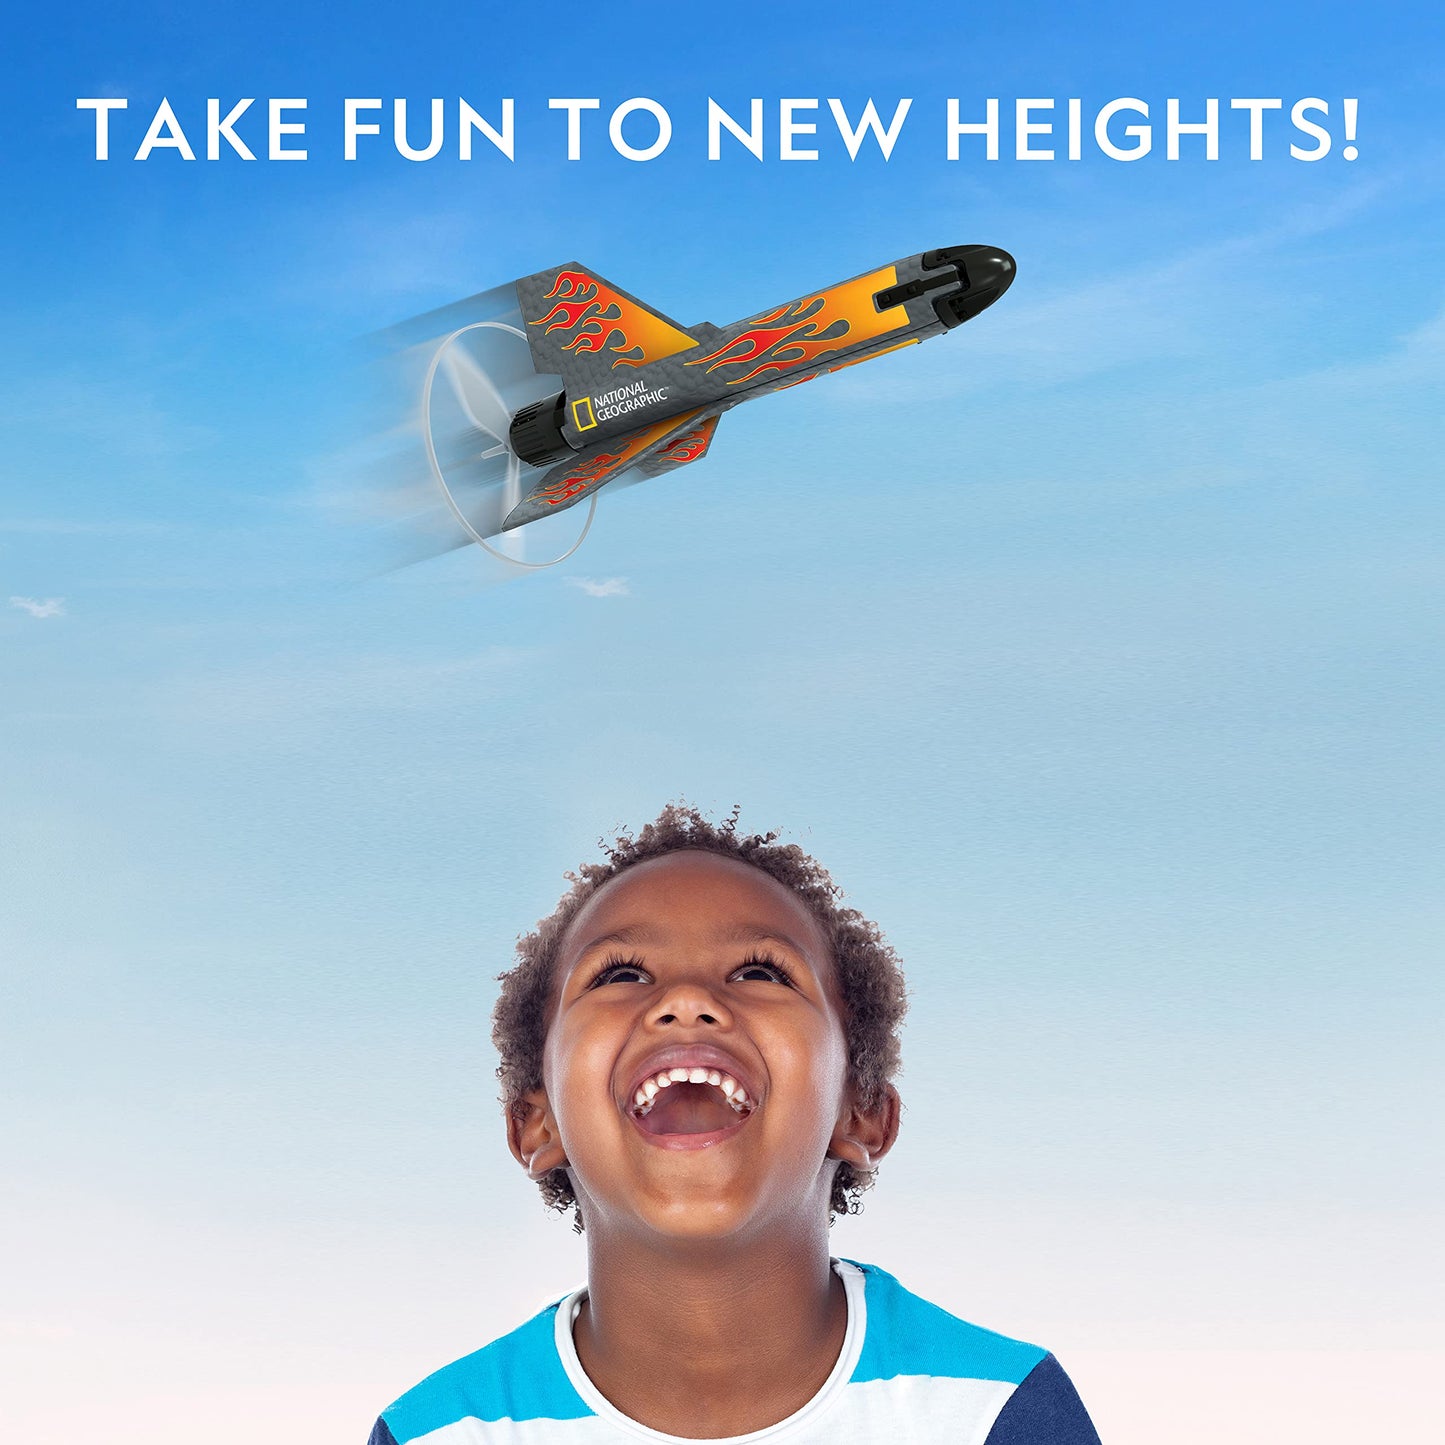 NATIONAL GEOGRAPHIC Rocket Launcher for Kids – Patent-Pending Motorized Air Rocket Toy, Launch up to 200 ft. with Safe Landing, Kids Outdoor Toys & Model Rockets, Gifts for Boys and Girls, Space Toys